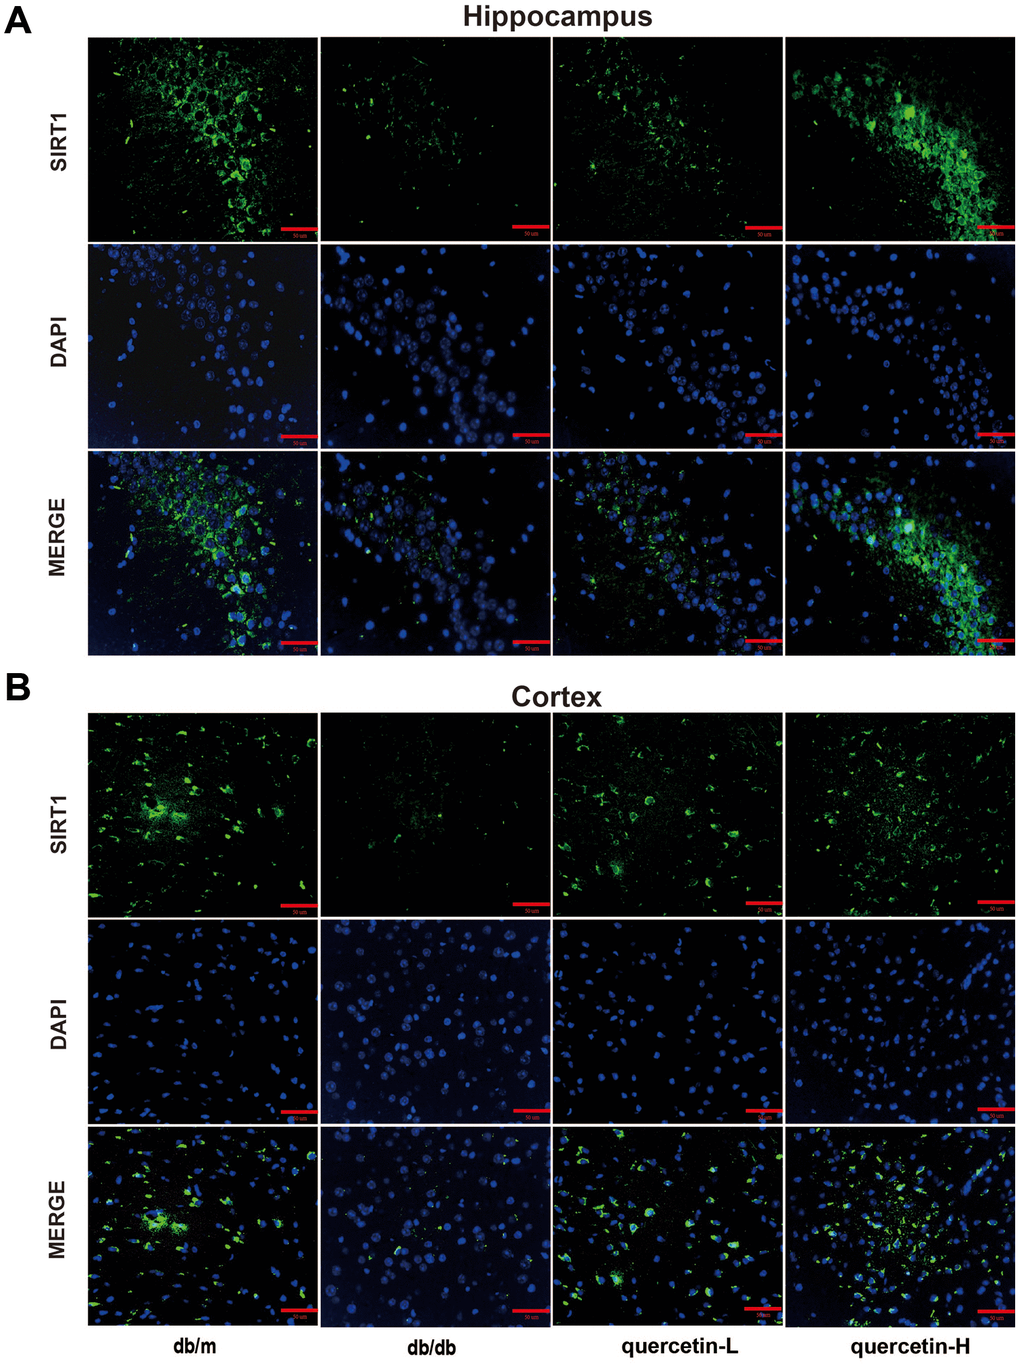 Quercetin activates SIRT1 in the brain of db/db mice. (A) Immunofluorescence of SIRT1 in hippocampus. (B) Immunofluorescence of sirt1 in cortex. Scale bar: 100 μm.